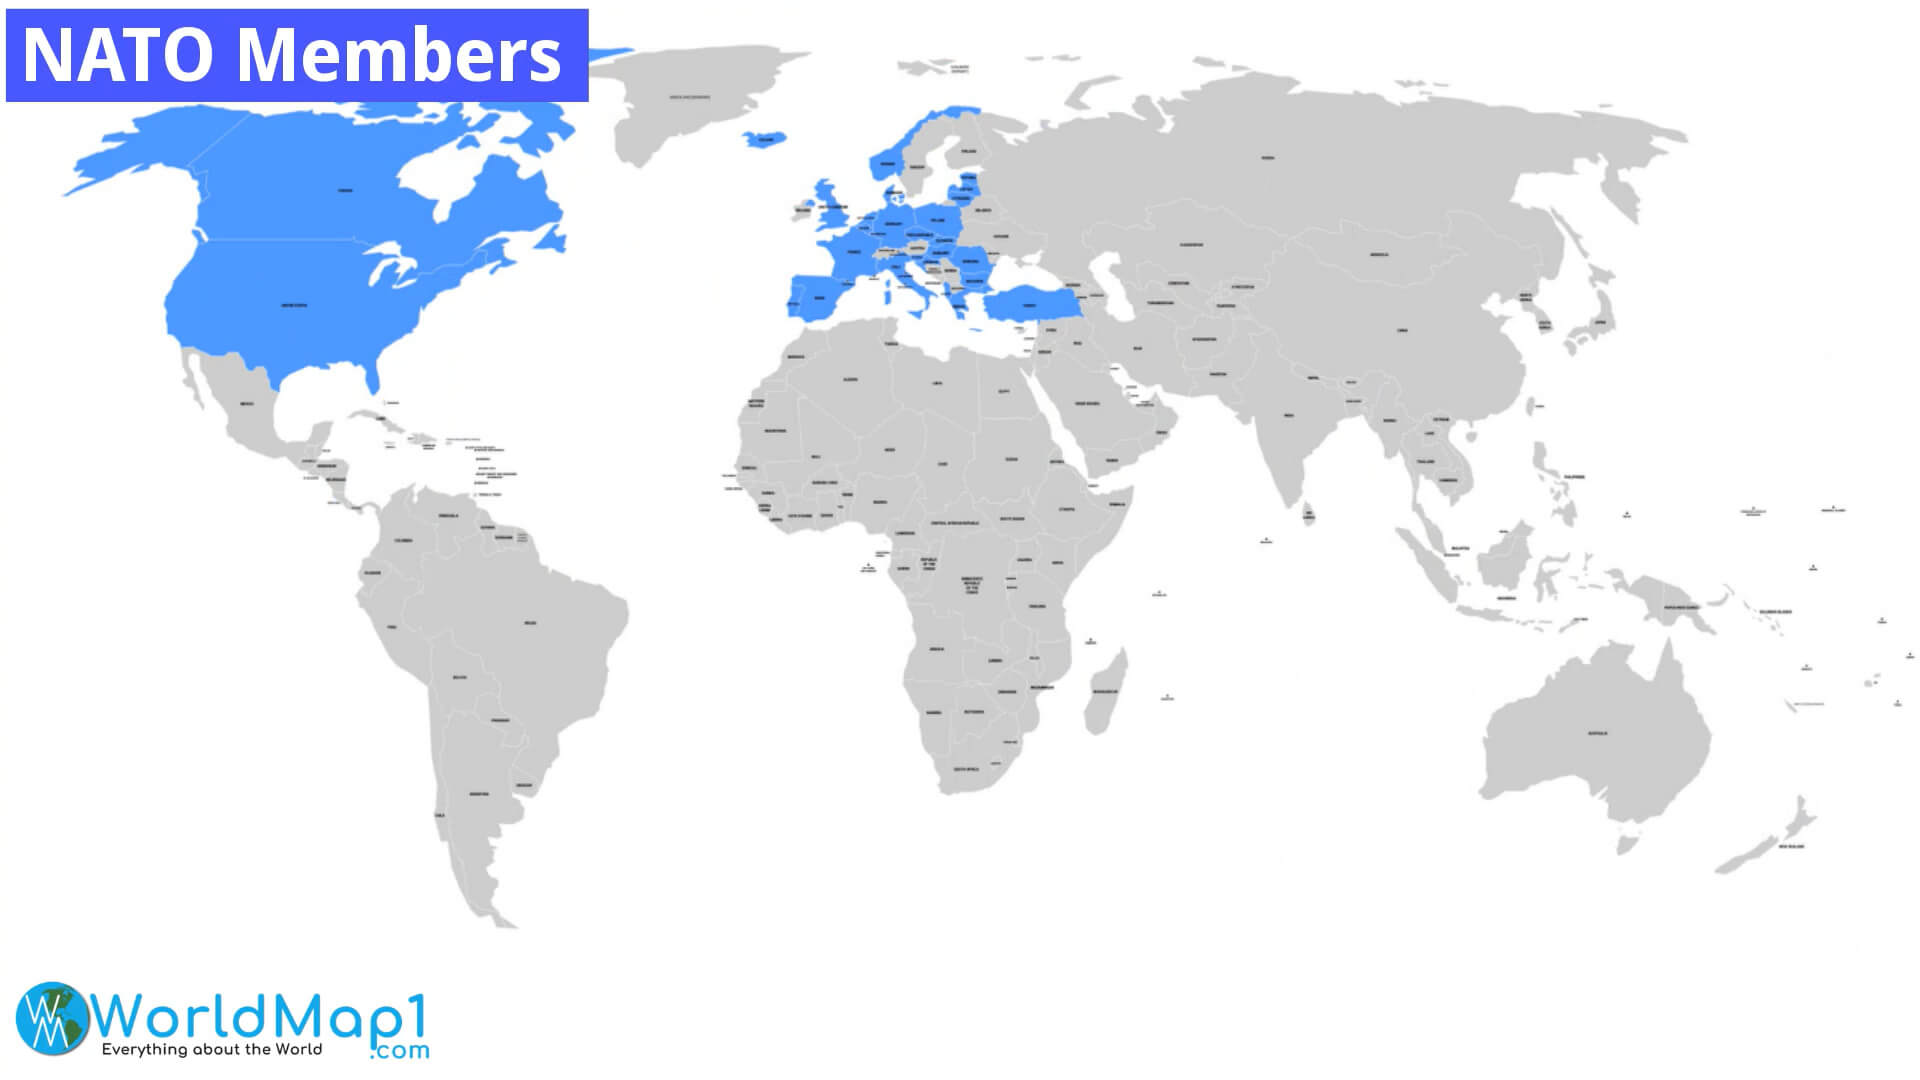 NATO Members Map with the World